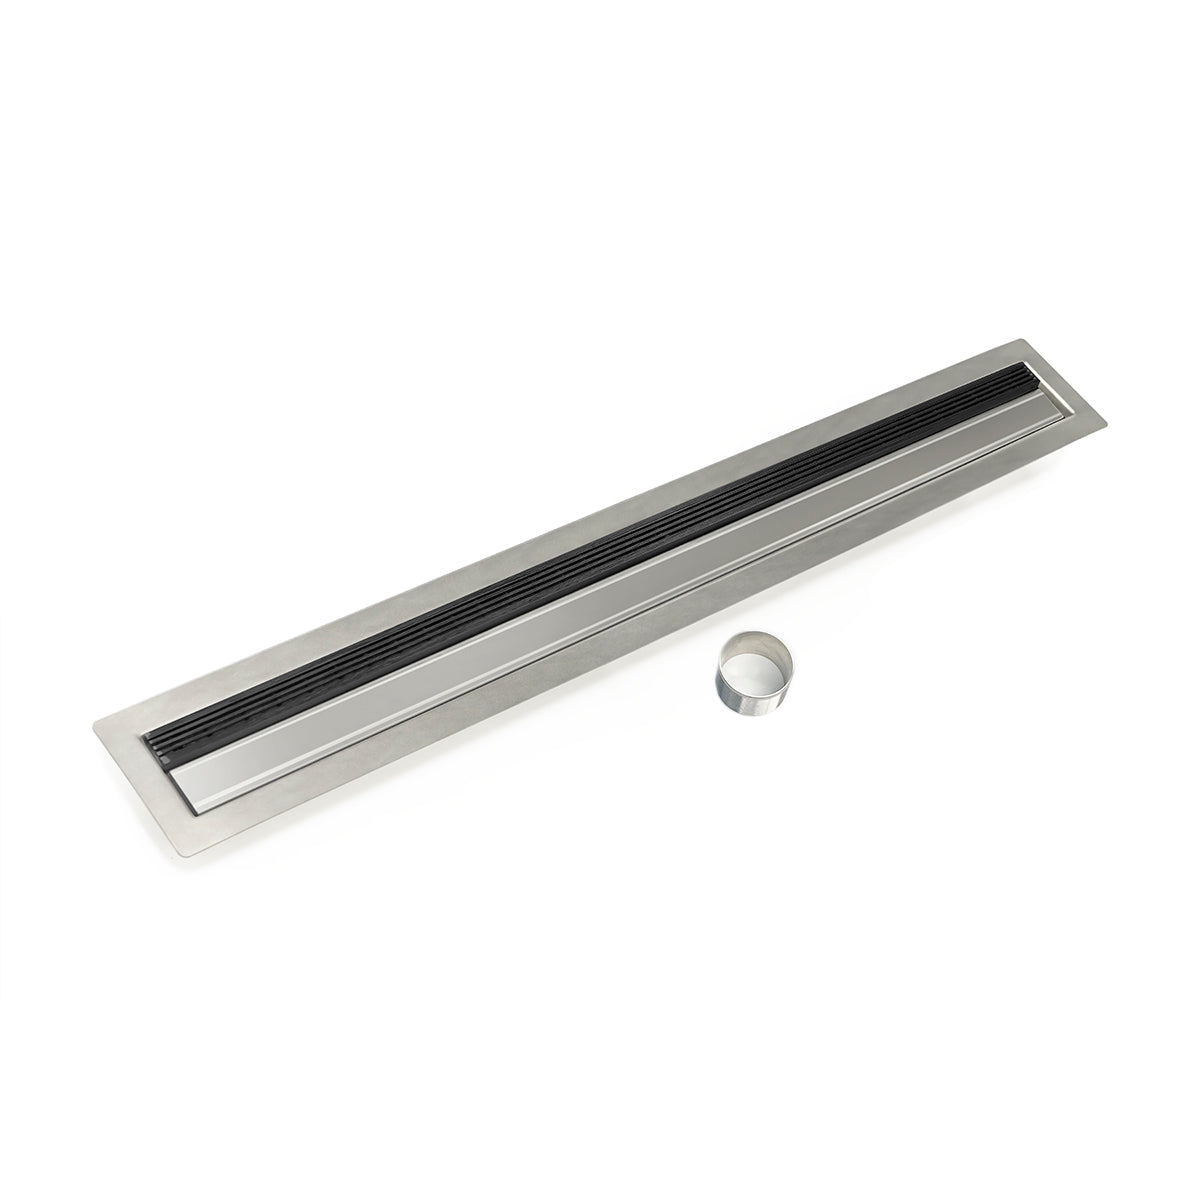 Infinity Drain 36" FCB Series Double Waterproofing Linear Drain Kit with 1" Wedge Wire Grate